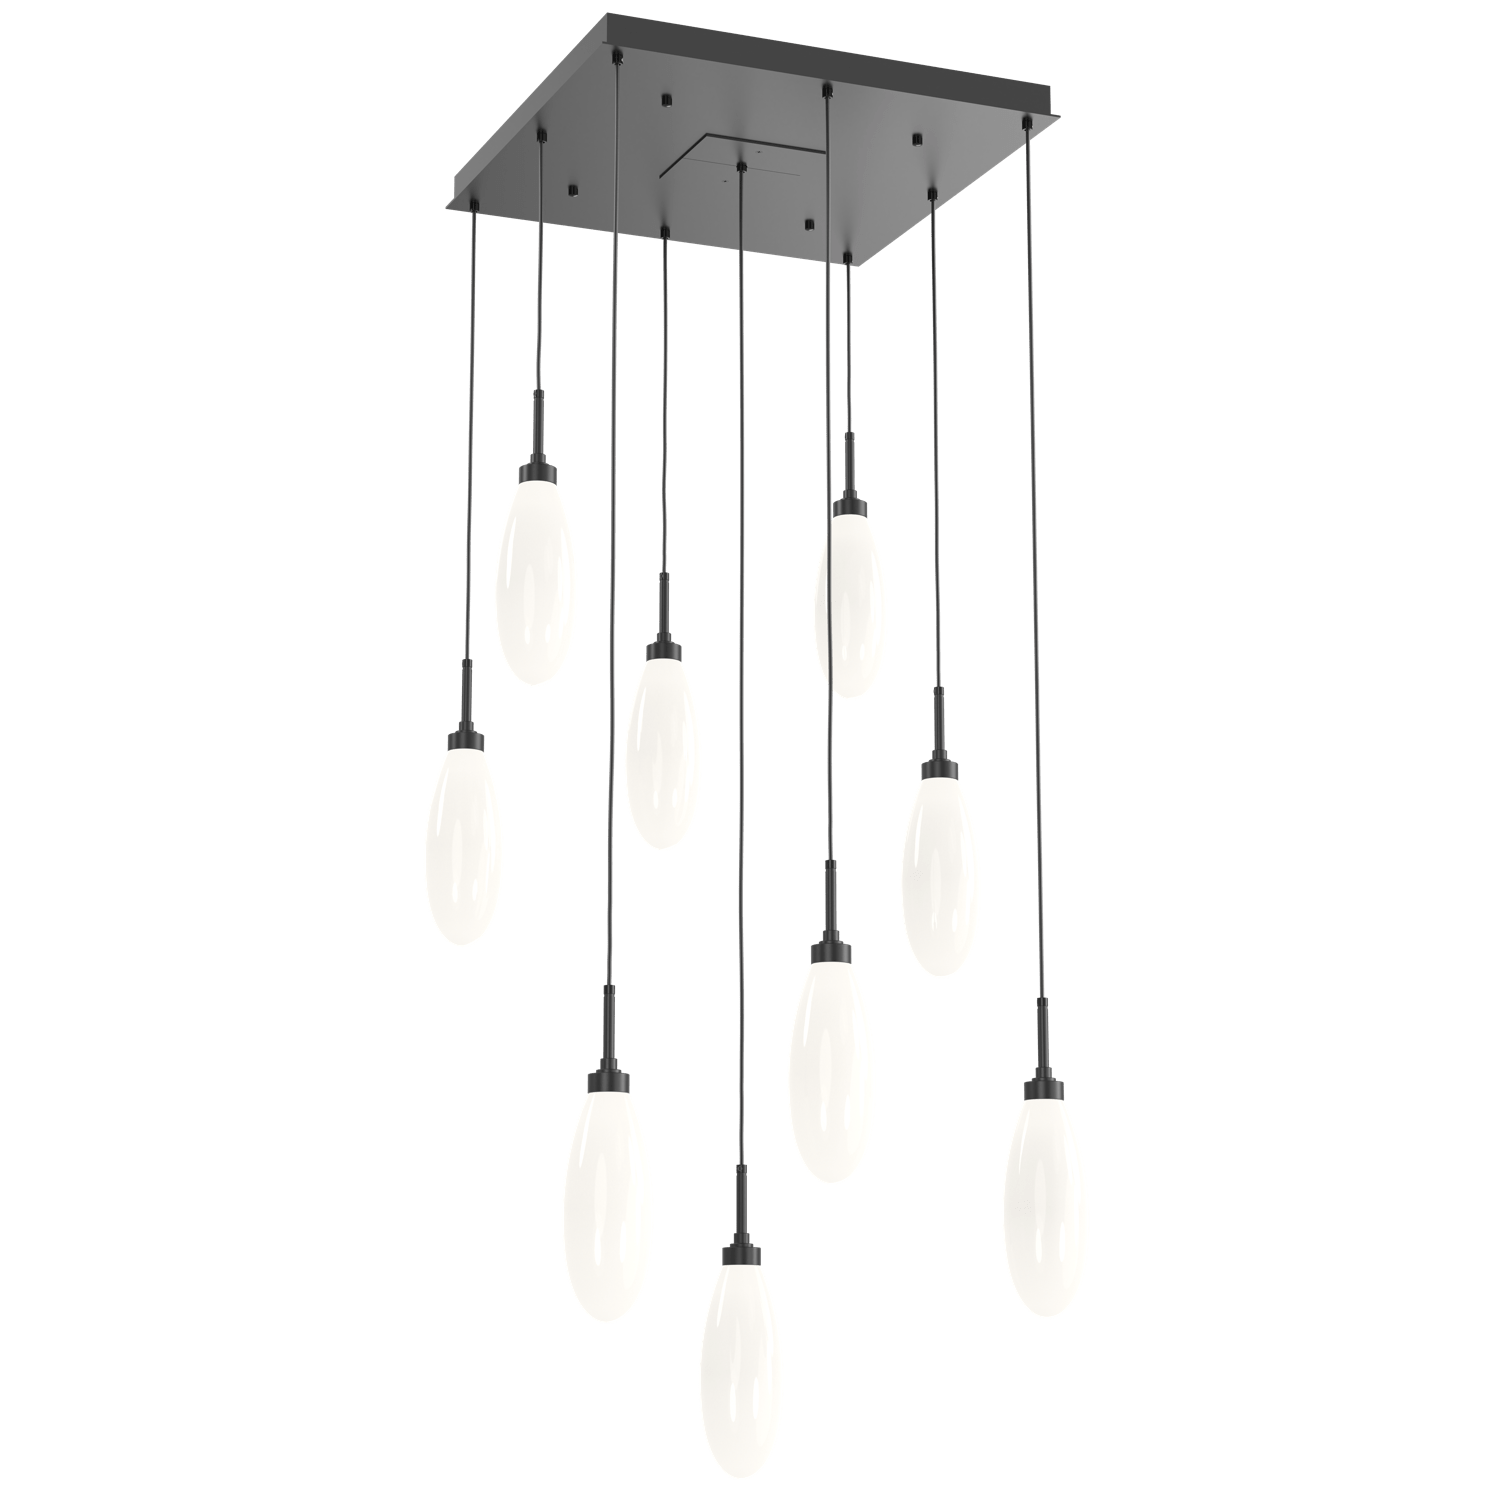 CHB0071-09-MB-WL-LL-Hammerton-Studio-Fiori-9-light-square-pendant-chandelier-with-matte-black-finish-and-opal-white-glass-shades-and-LED-lamping